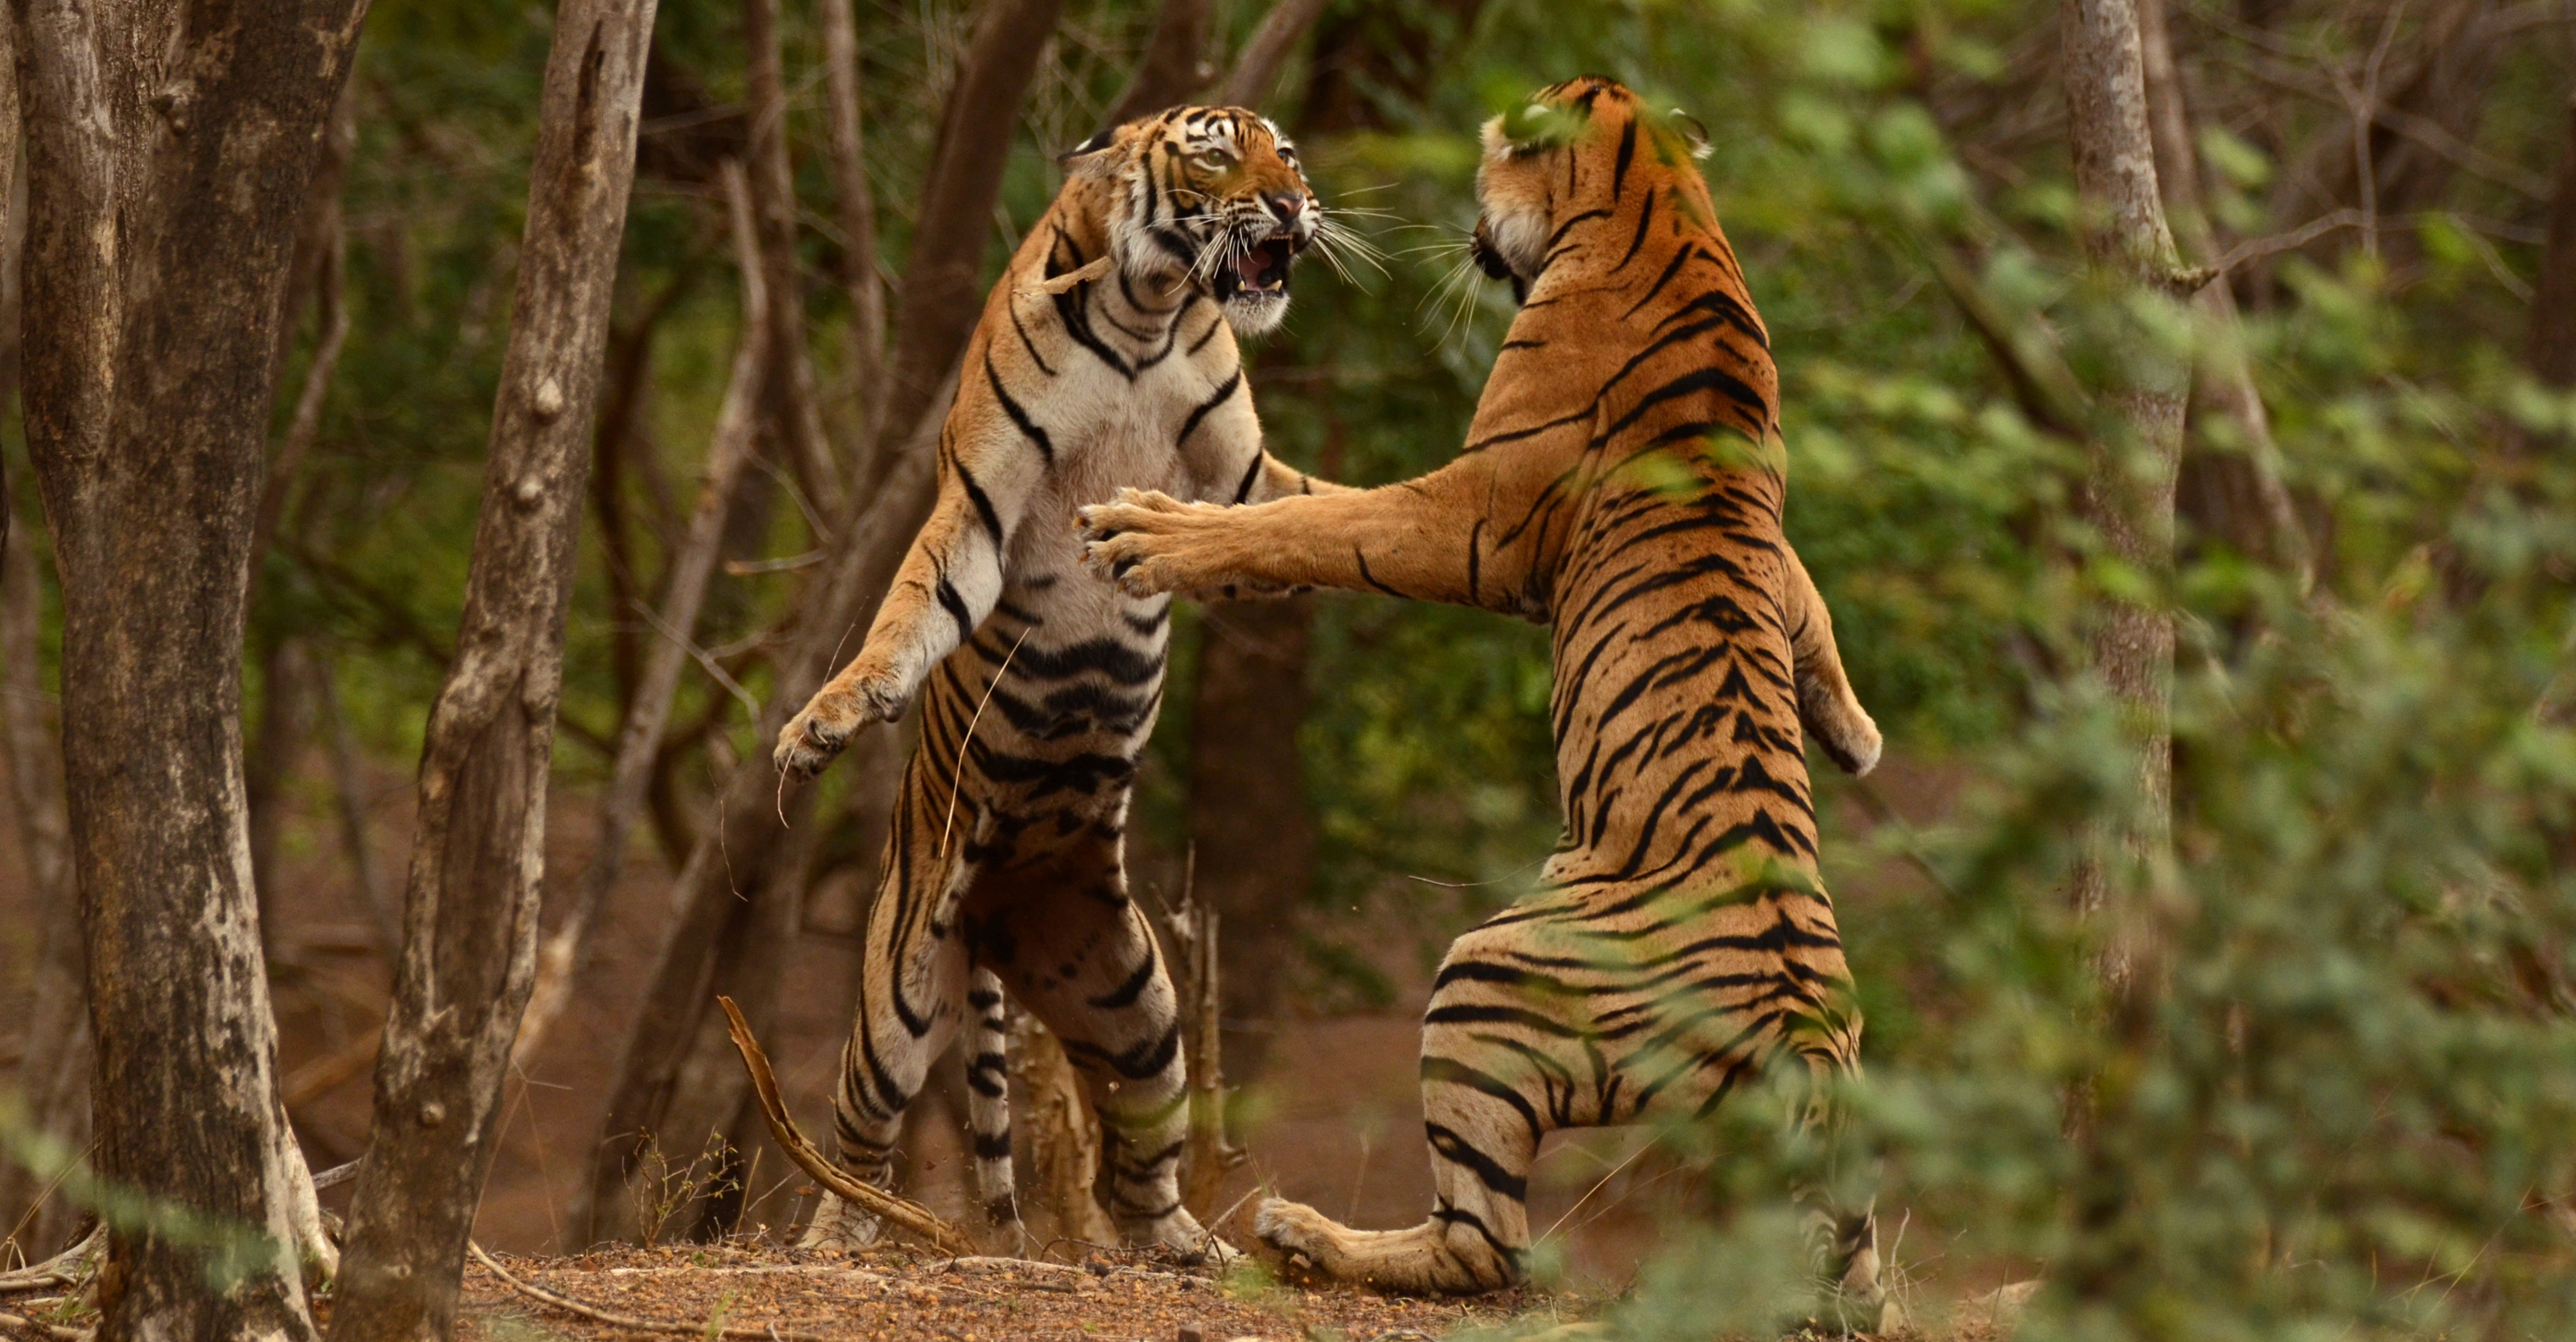 Two tigers stand on their hind legs as they fight each other in Ranthambore National Park, India